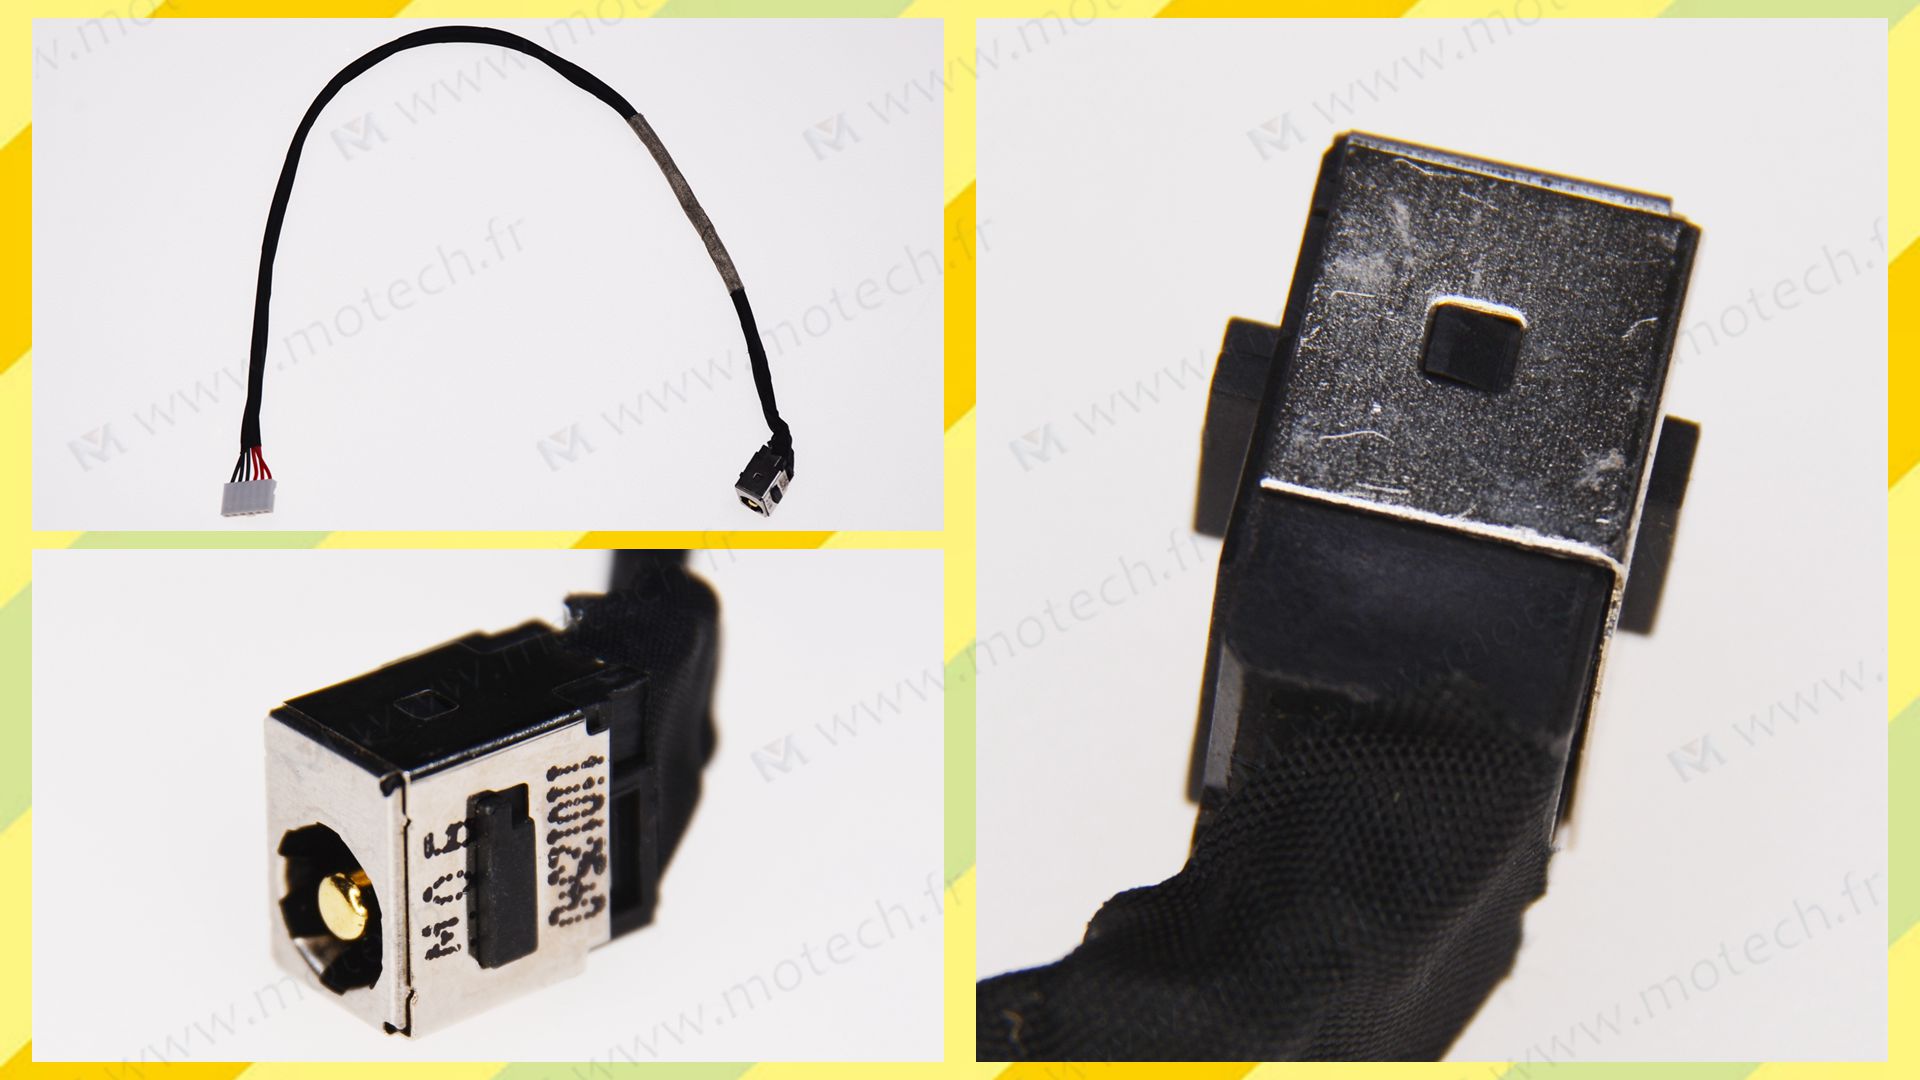 MSI MS-16GC charging connector, MSI MS-16GC DC Power Jack, MSI MS-16GC DC IN Cable, MSI MS-16GC Power Jack, MSI MS-16GC plug, MSI MS-16GC Jack socket, MSI MS-16GC connecteur de charge, 